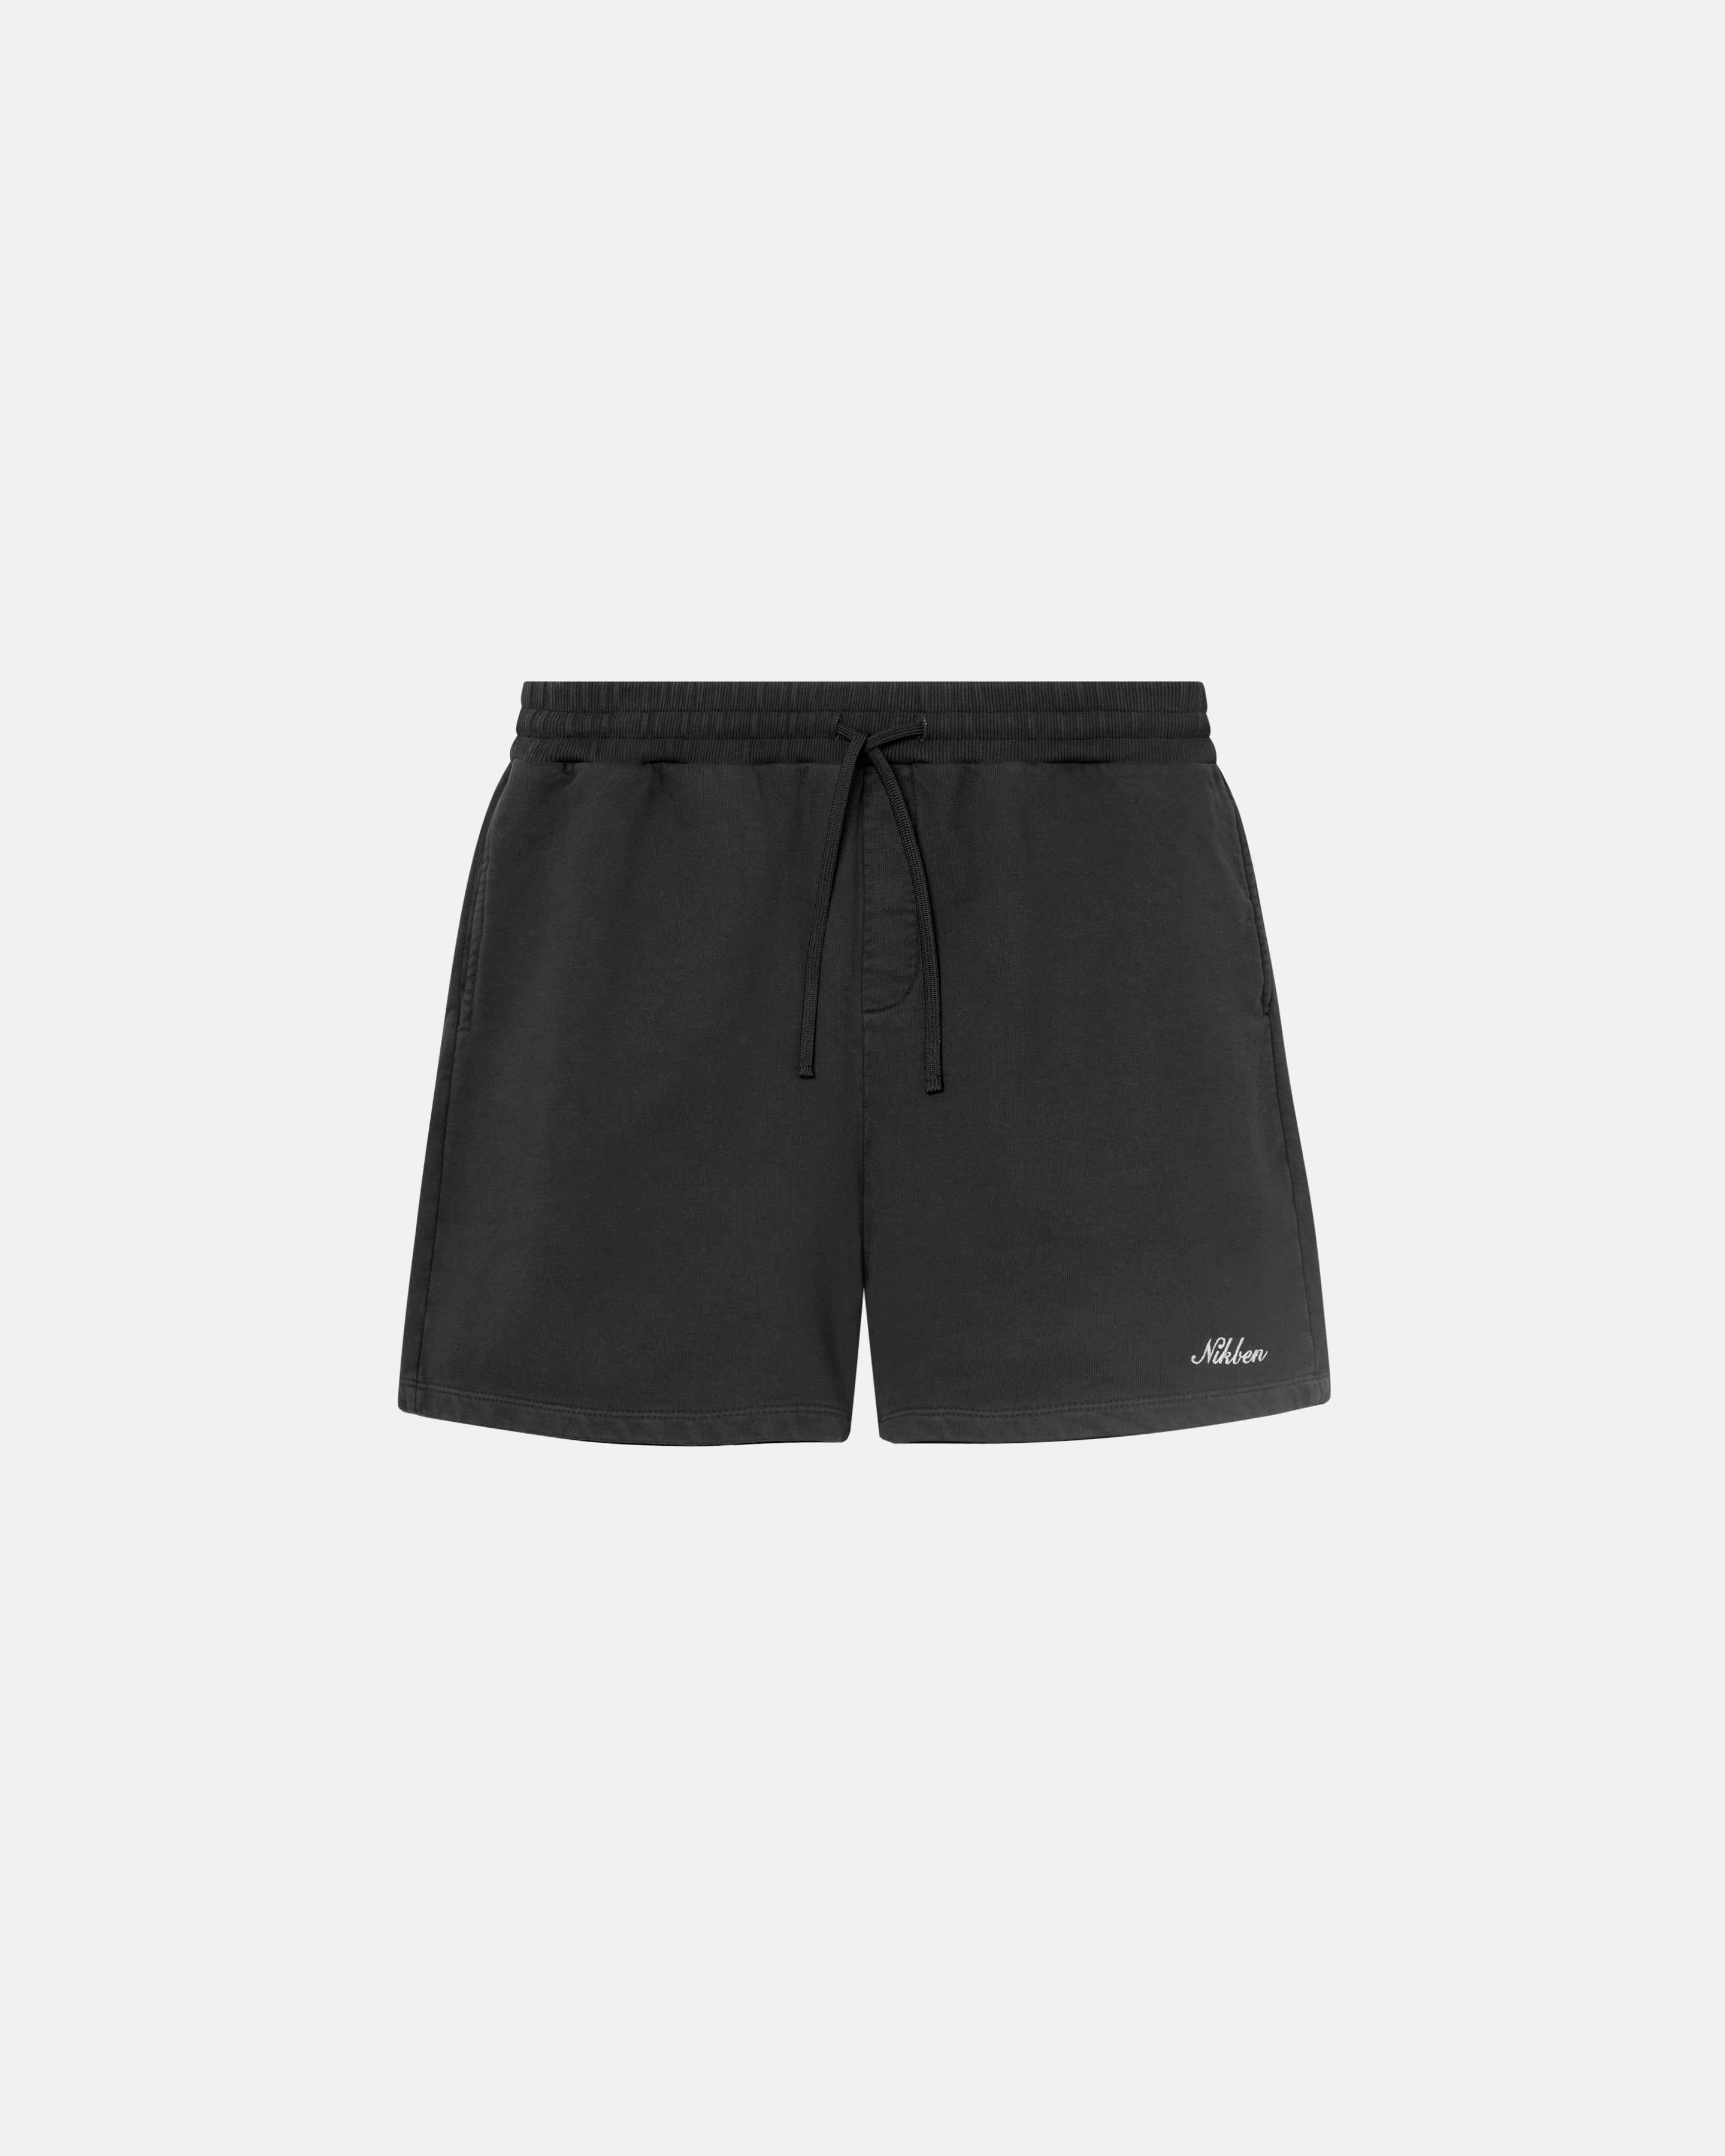 Black washed sweatshorts with elastic drawstrings and an embroidered script logo on the front leg